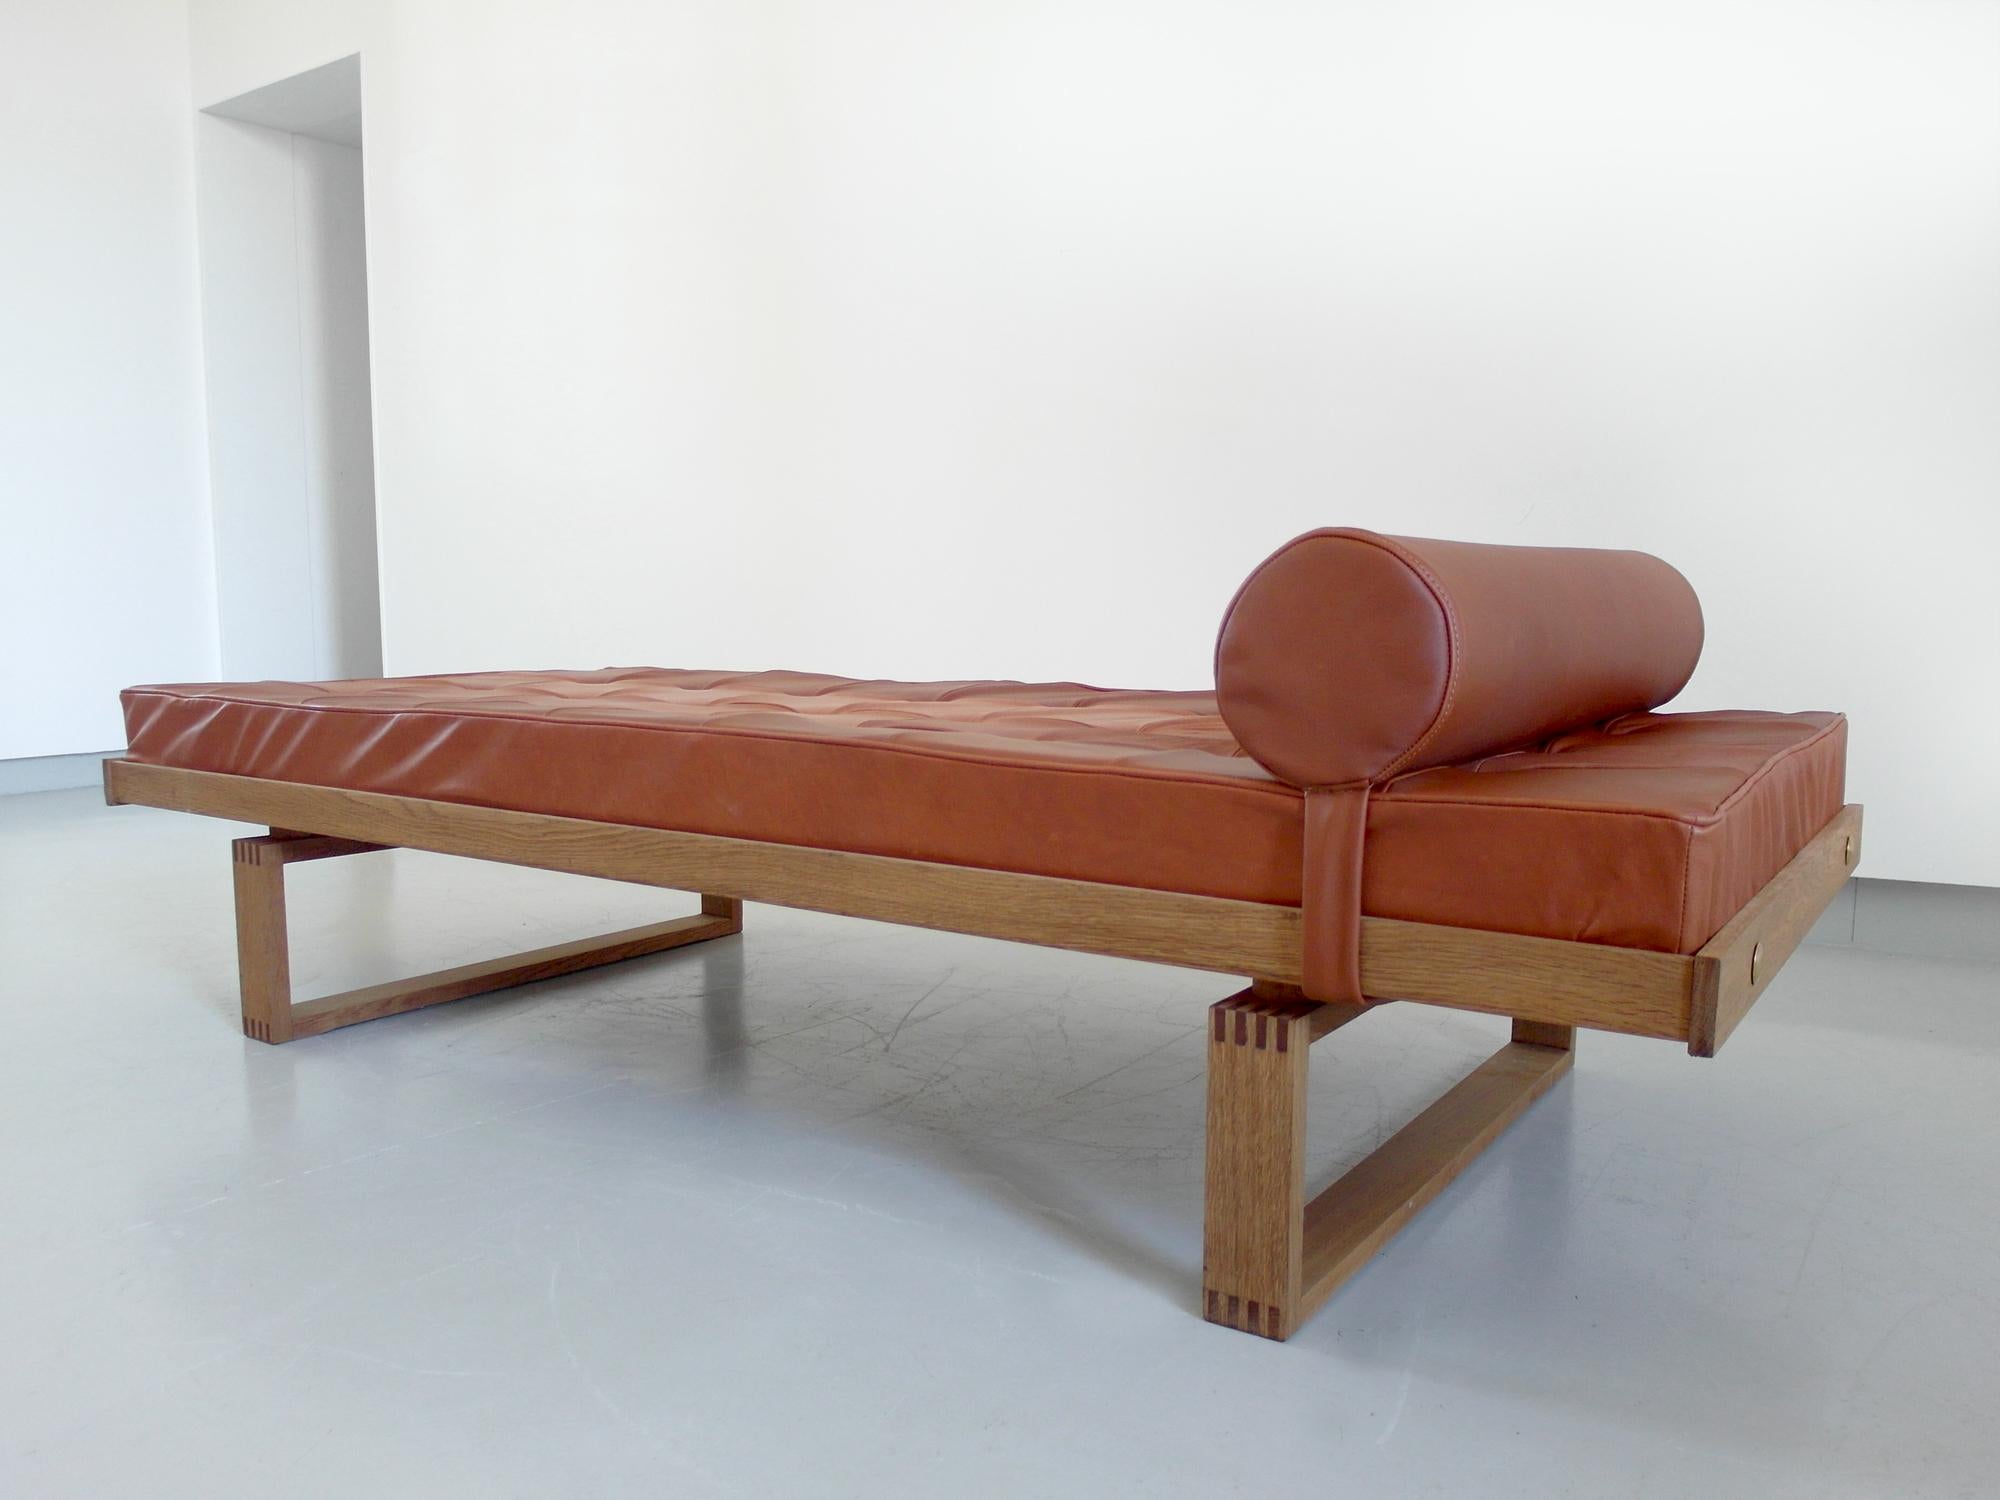 Stunning daybed in oak designed by Børge Mogensen manufactured by Danish manufacturer Fredericia Stolefabrik, Denmark, circa 1965. This daybed is executed in solid oakwood with beautiful wood joints and a slatted oakwood frame. Beautifully shaped